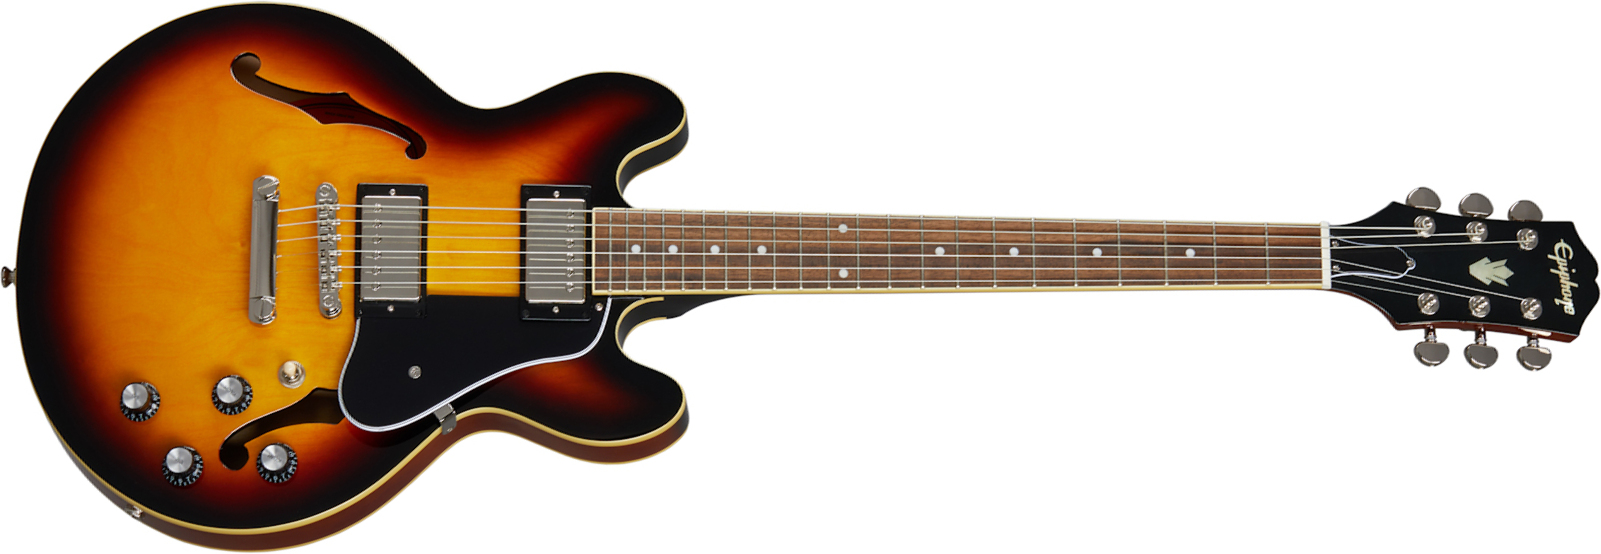 Epiphone Es-339 Inspired By Gibson 2020 2h Ht Rw - Vintage Sunburst - Semi-hollow electric guitar - Main picture